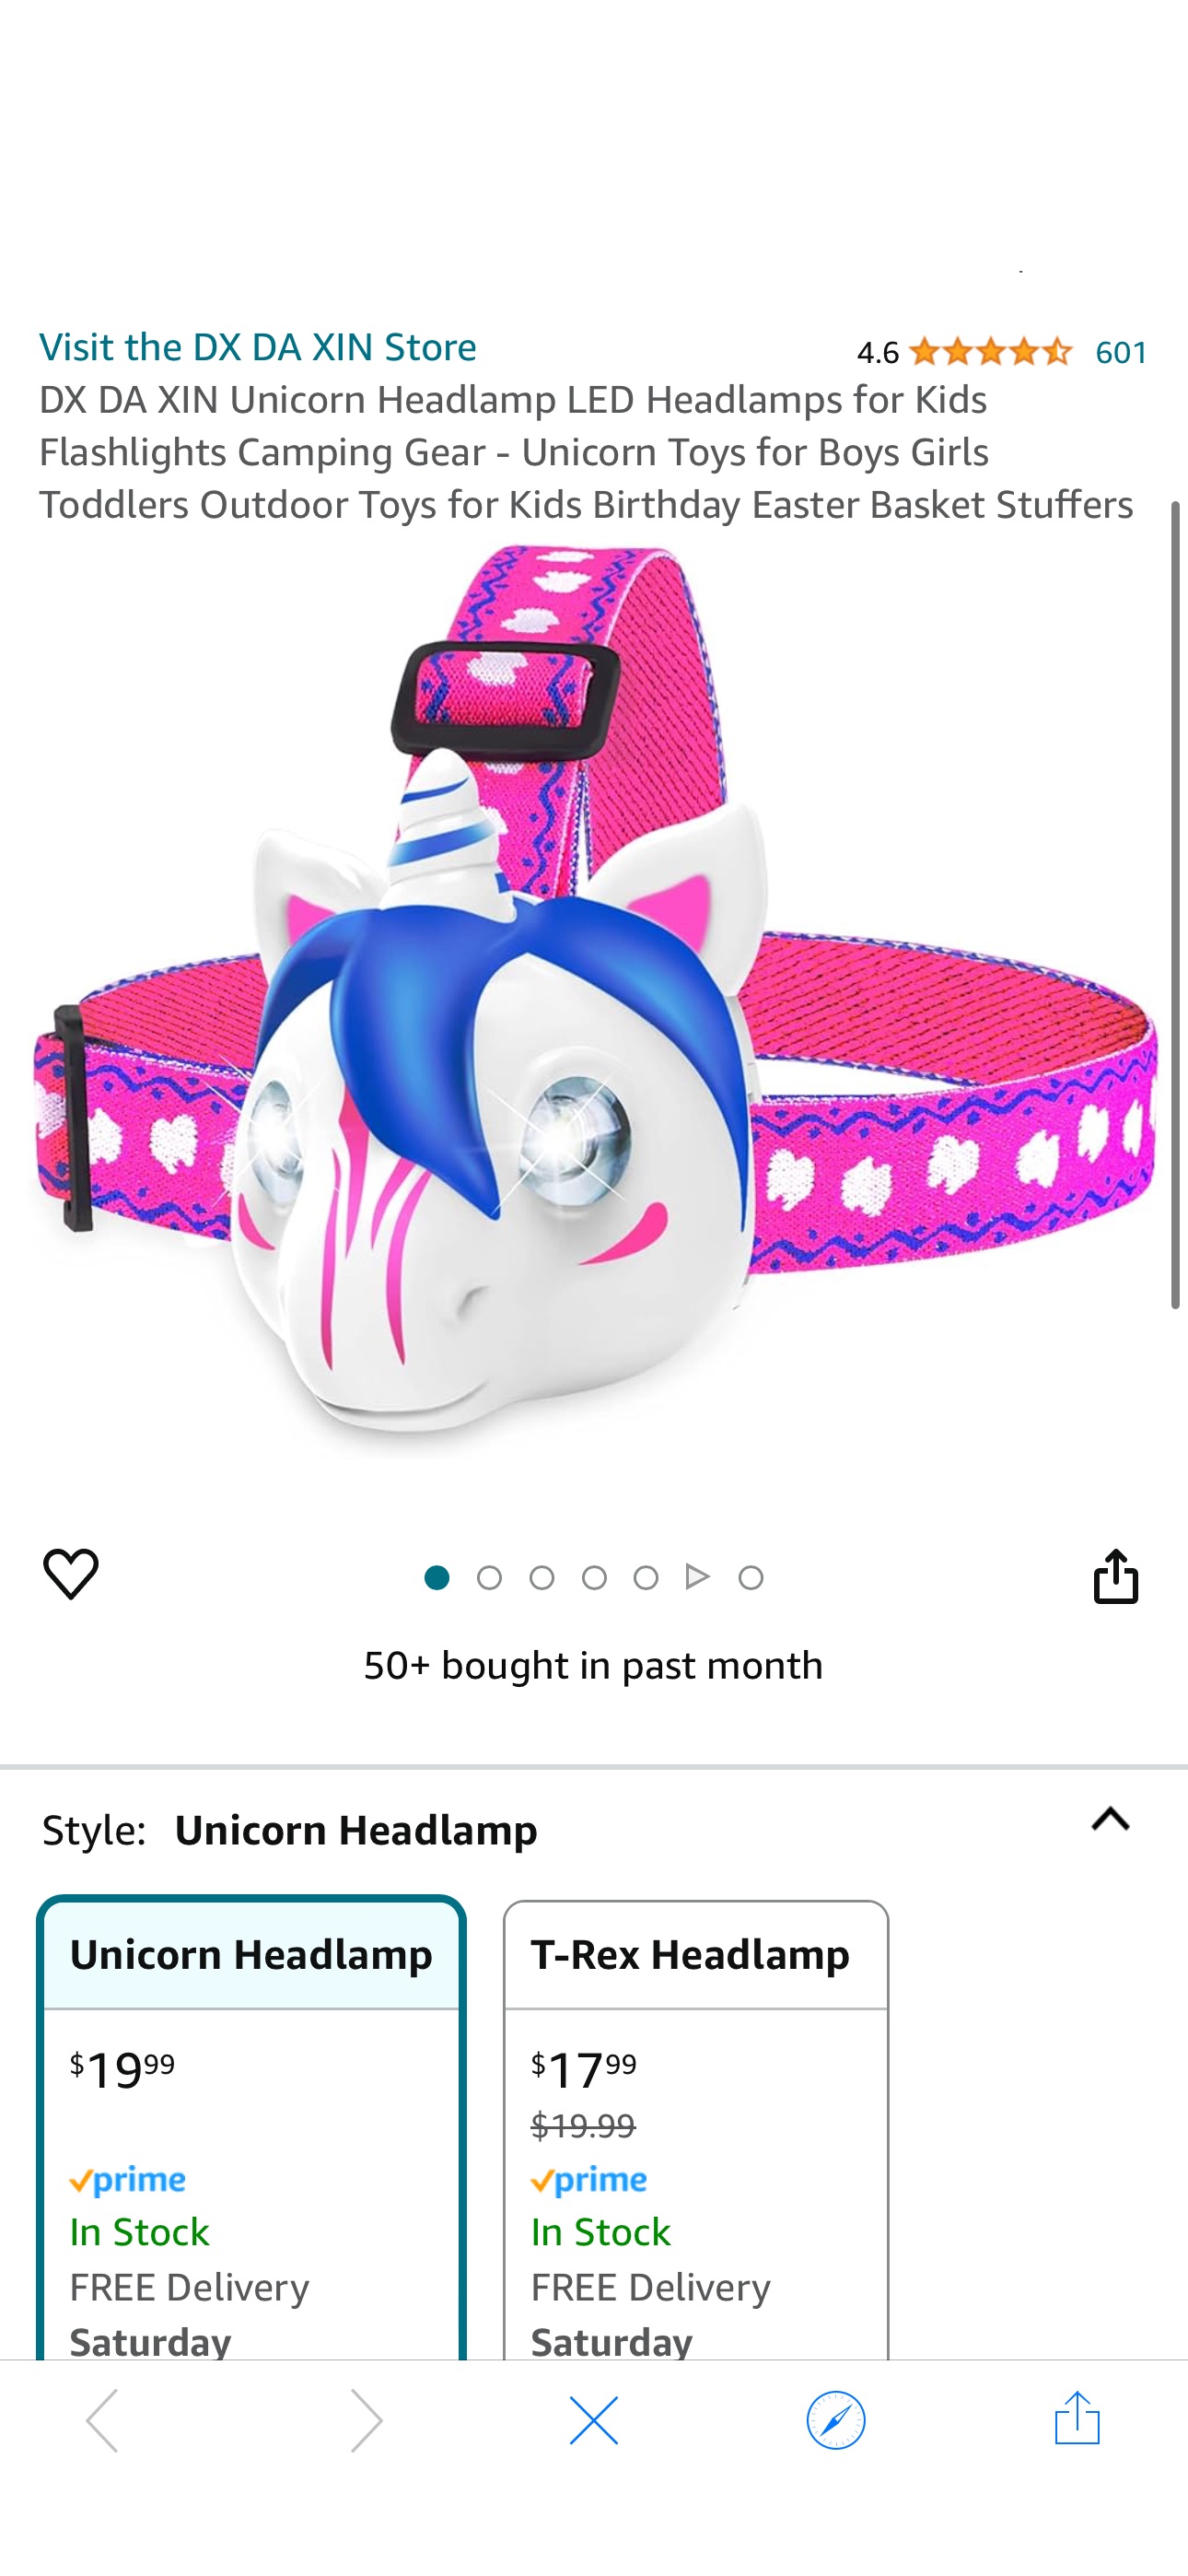 Amazon.com: DX DA XIN Unicorn Headlamp LED Headlamps for Kids Flashlights Camping Gear - Unicorn Toys for Boys Girls Toddlers Outdoor Toys clip coupon